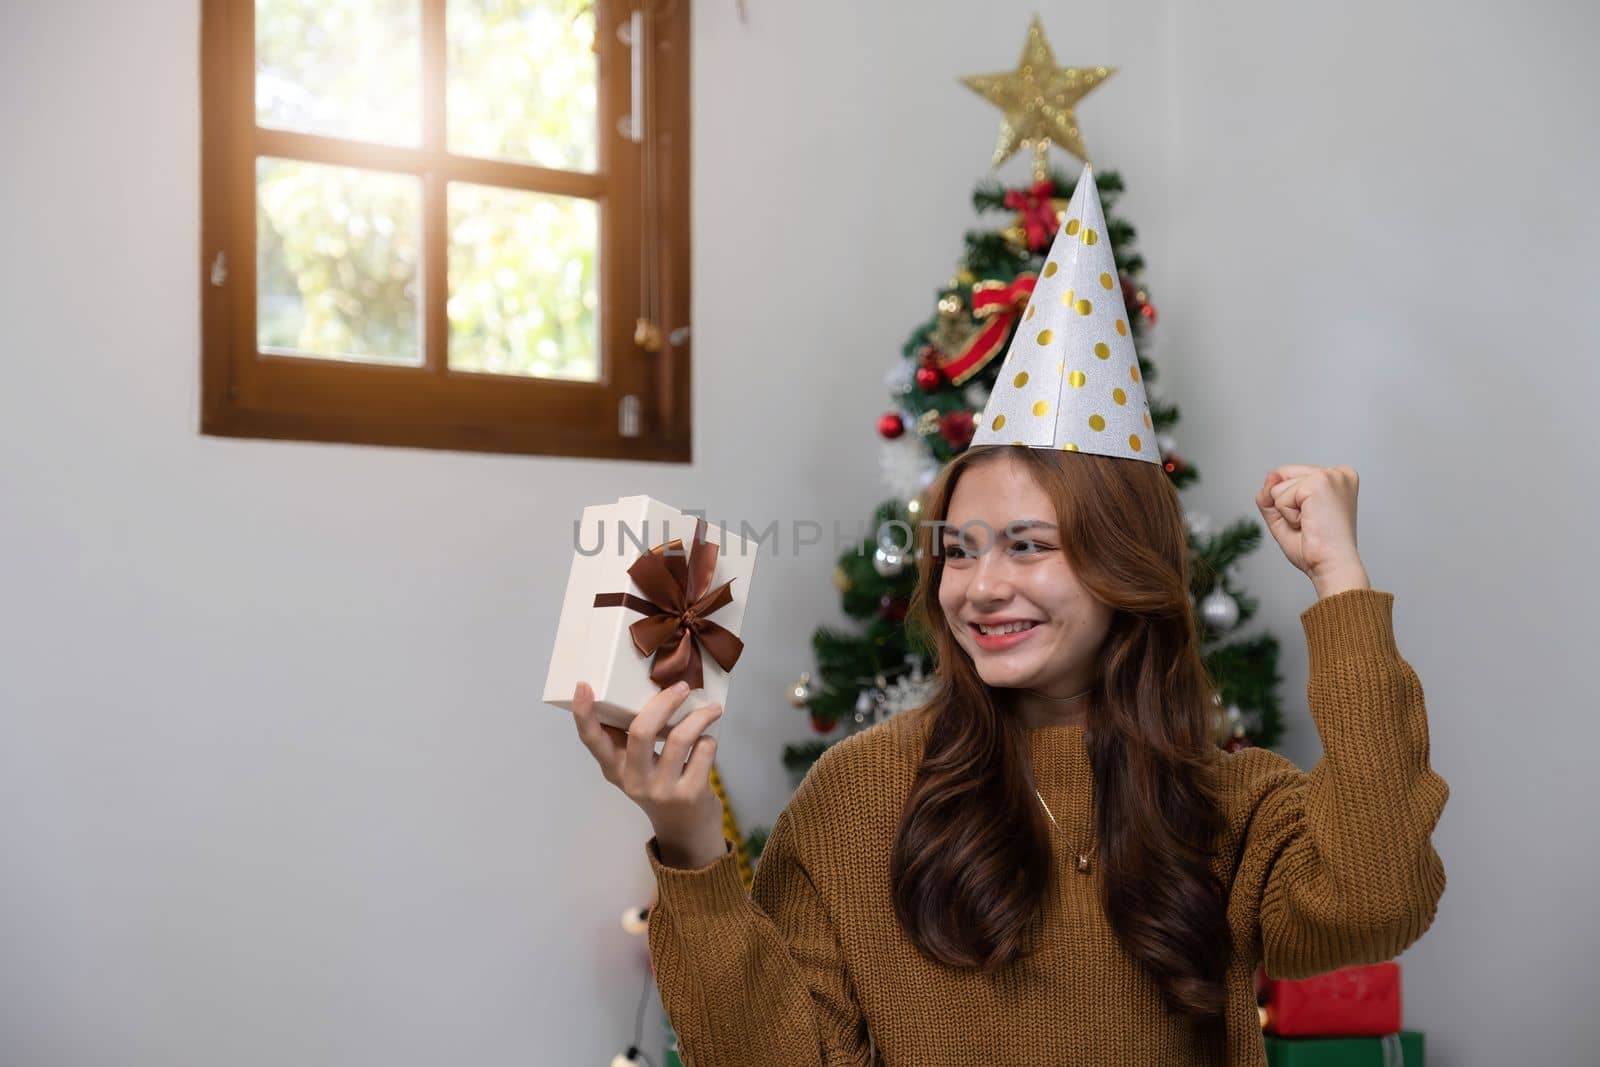 Merry Christmas and Happy Holidays Young woman with a beautiful face in a yellow shirt shows joy with gift boxes in a house